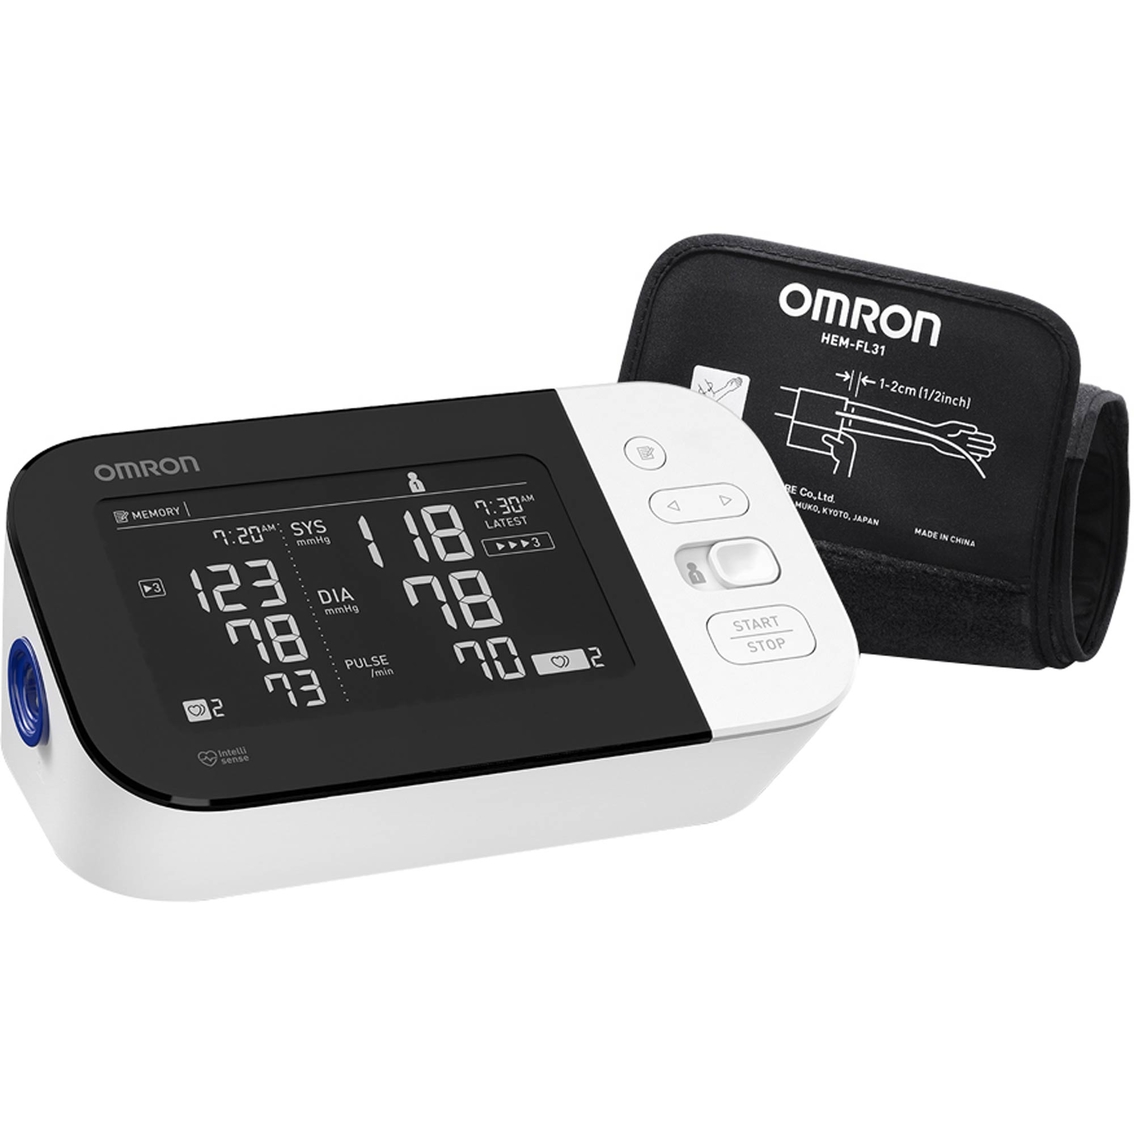 Omron 10 Series Digital Blood Pressure Monitor with Bluetooth - Image 3 of 5